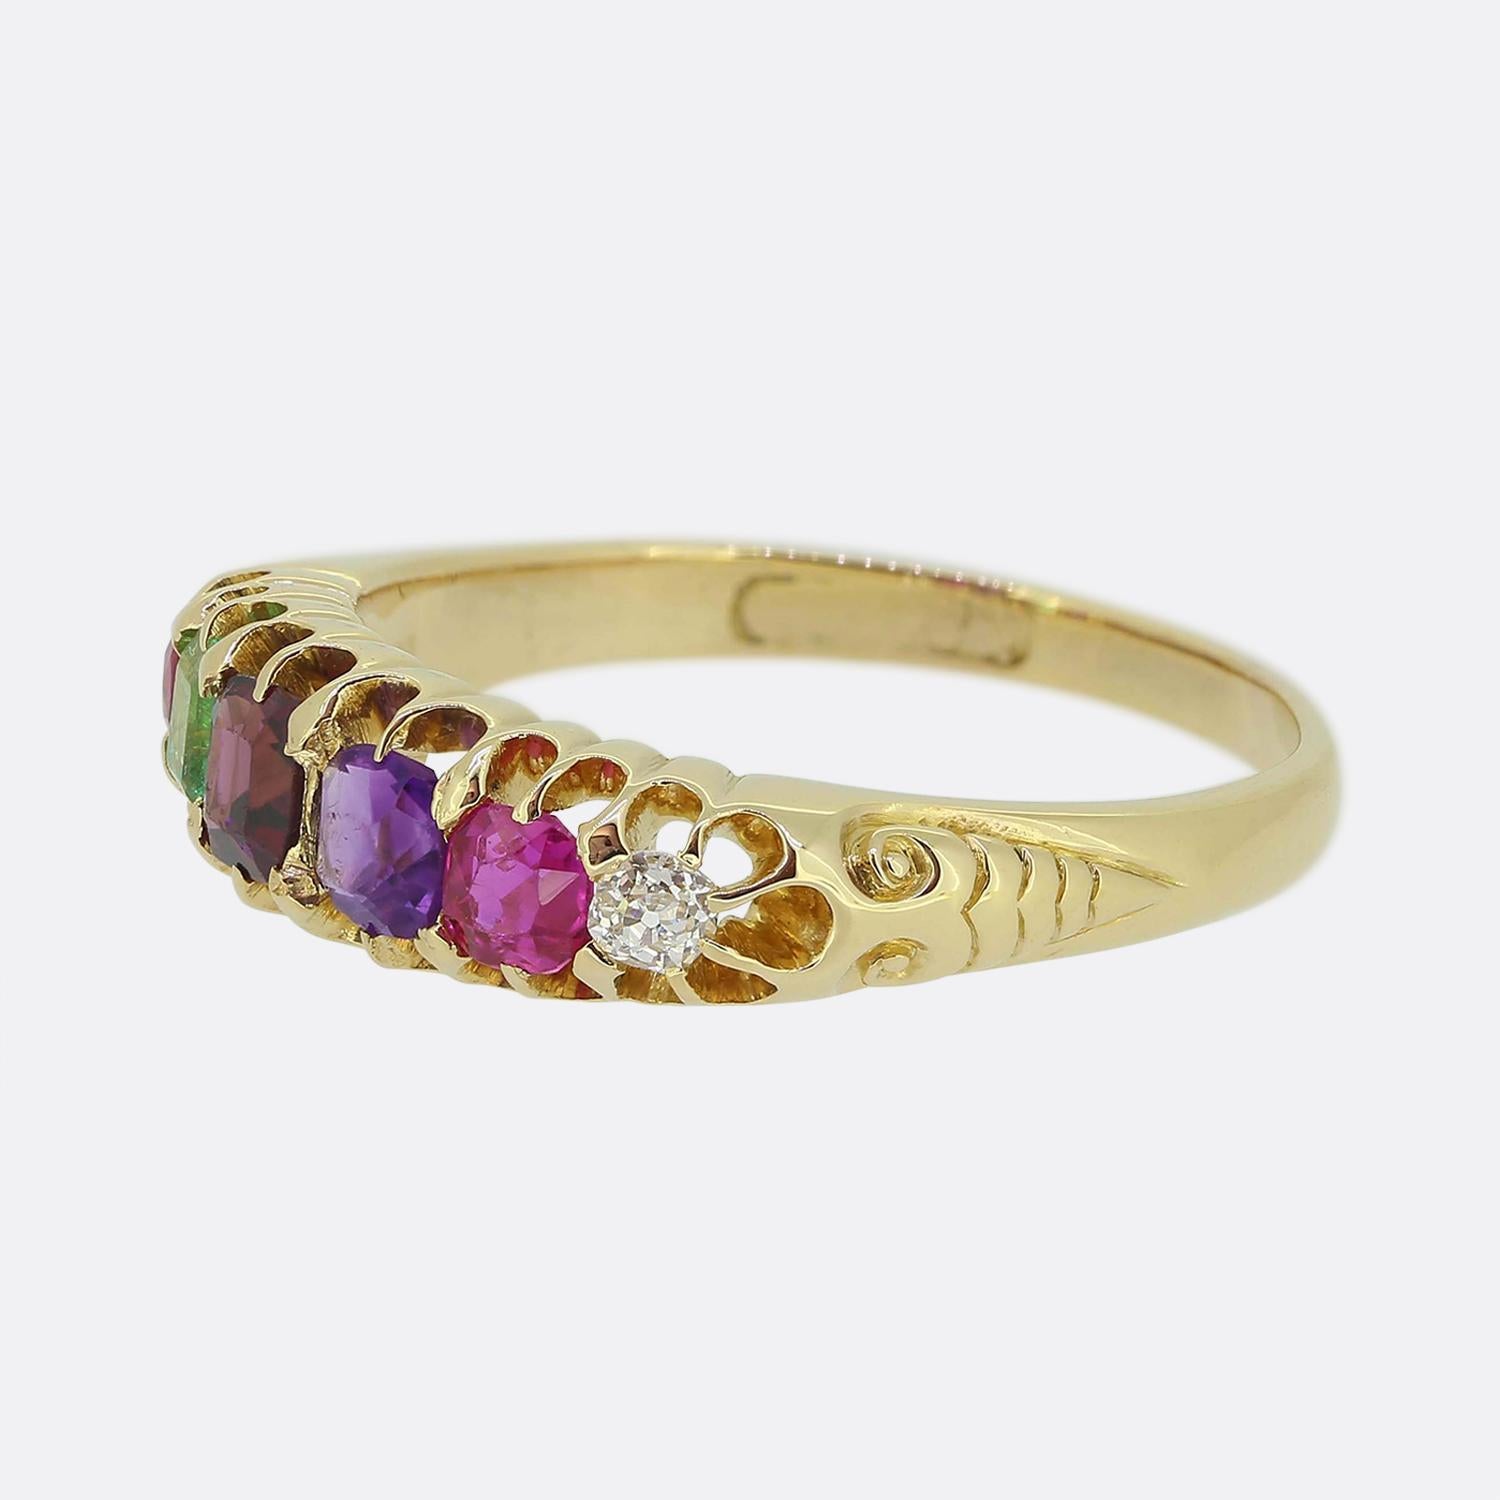 Here we have a delightful 18ct yellow gold 'REGARD' ring taken from the Victorian era; a time when jewels such as this sent secret messages to an admirer. The first letter of each stone used here spells of the word. Ruby, emerald, garnet, amethyst,